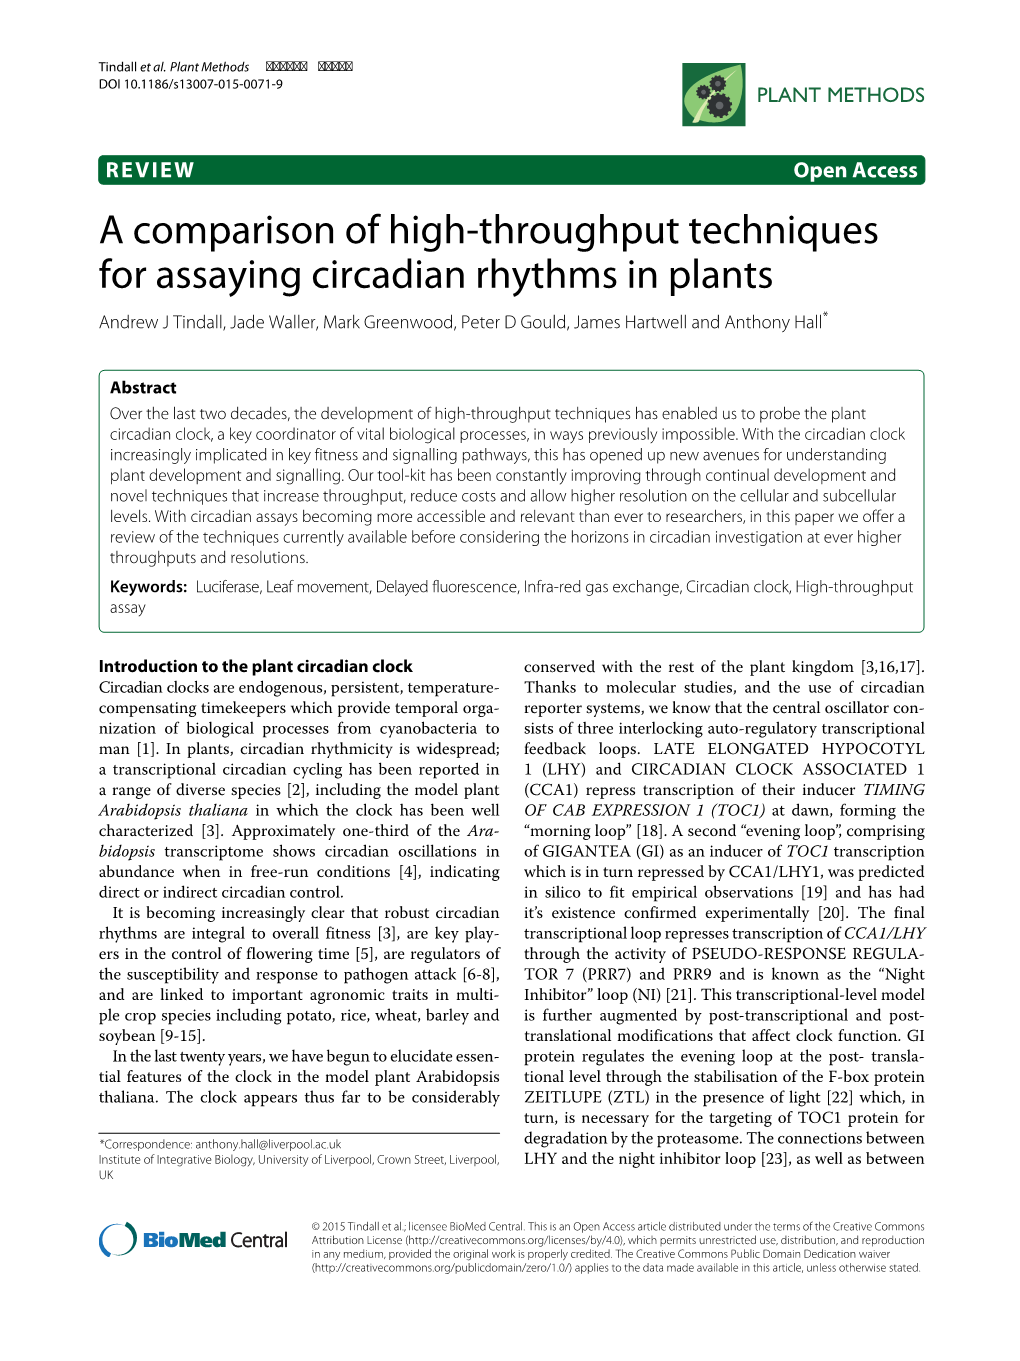 A Comparison of High-Throughput Techniques for Assaying Circadian